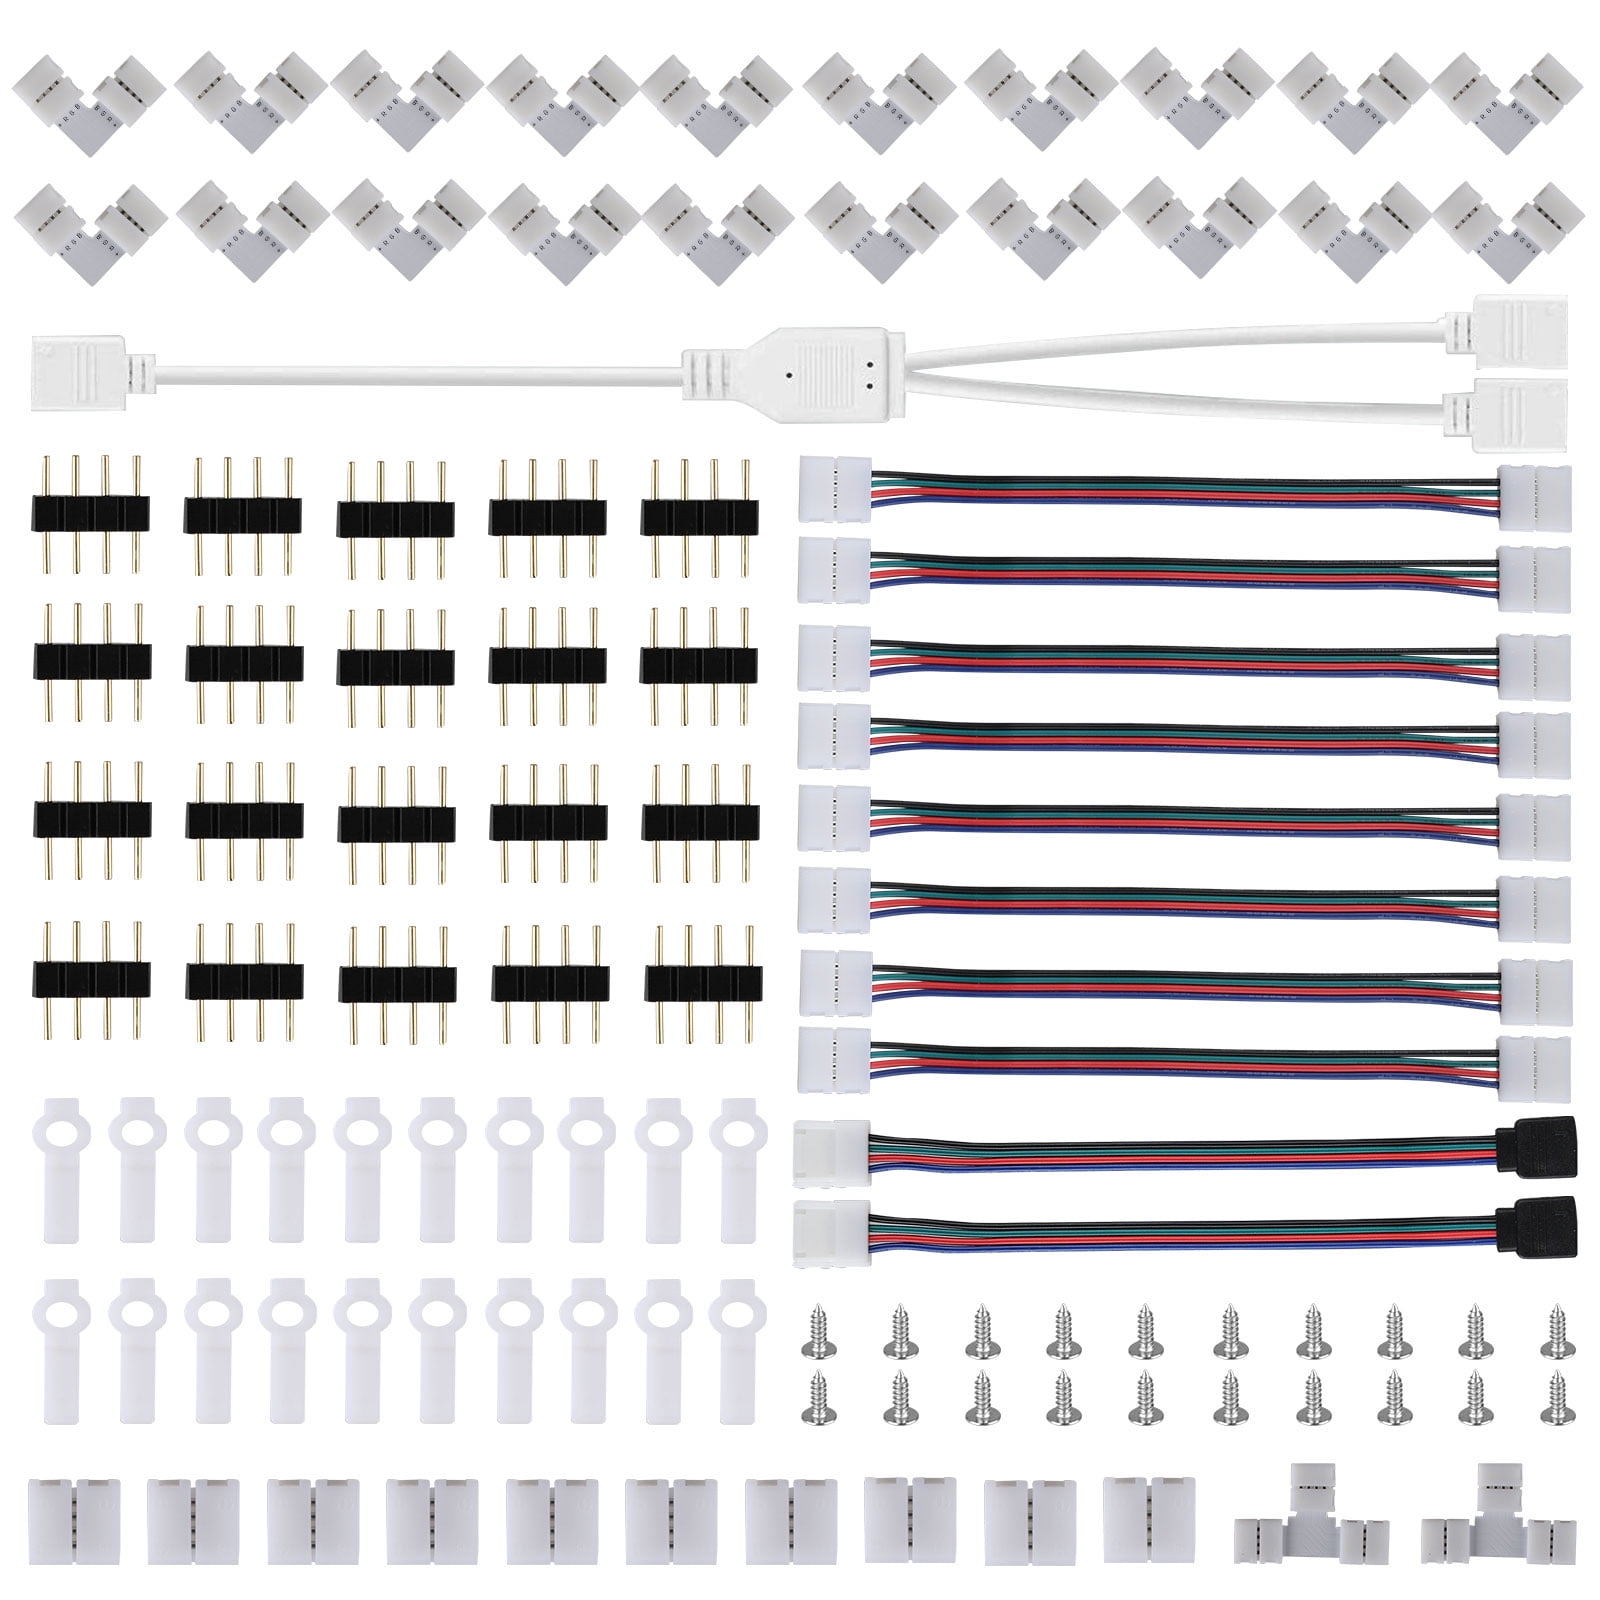 LED Strip Connector Kit for 5050 10mm 4Pin, Include 8 Strip Jumper  Connectors, 10 Gapless LED Strip Connectors, 20 LED Strip Light Clips, Soft  and Bendable, Provides Most Parts for DIY 